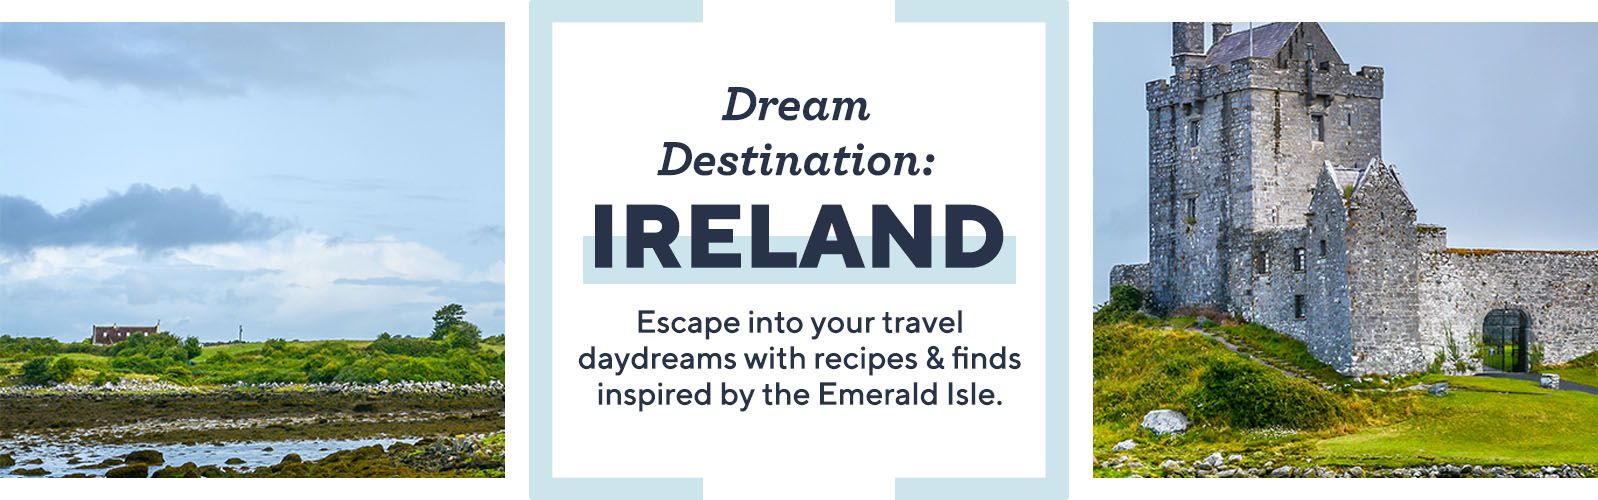 Dream Destination: Ireland.  Escape into your travel daydreams with recipes & finds inspired by the Emerald Isle.